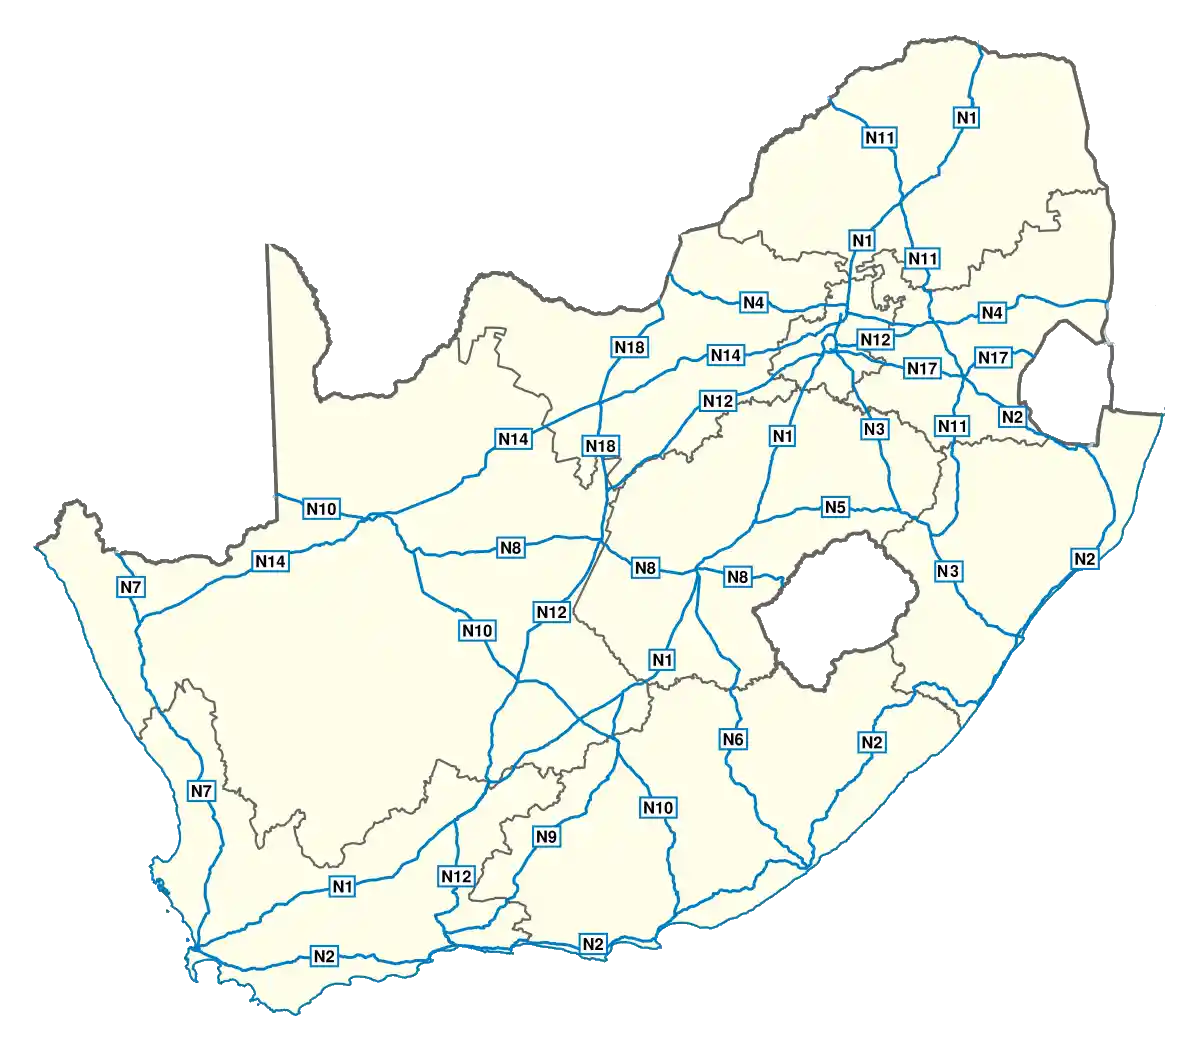 south-africa-main-road-map.png